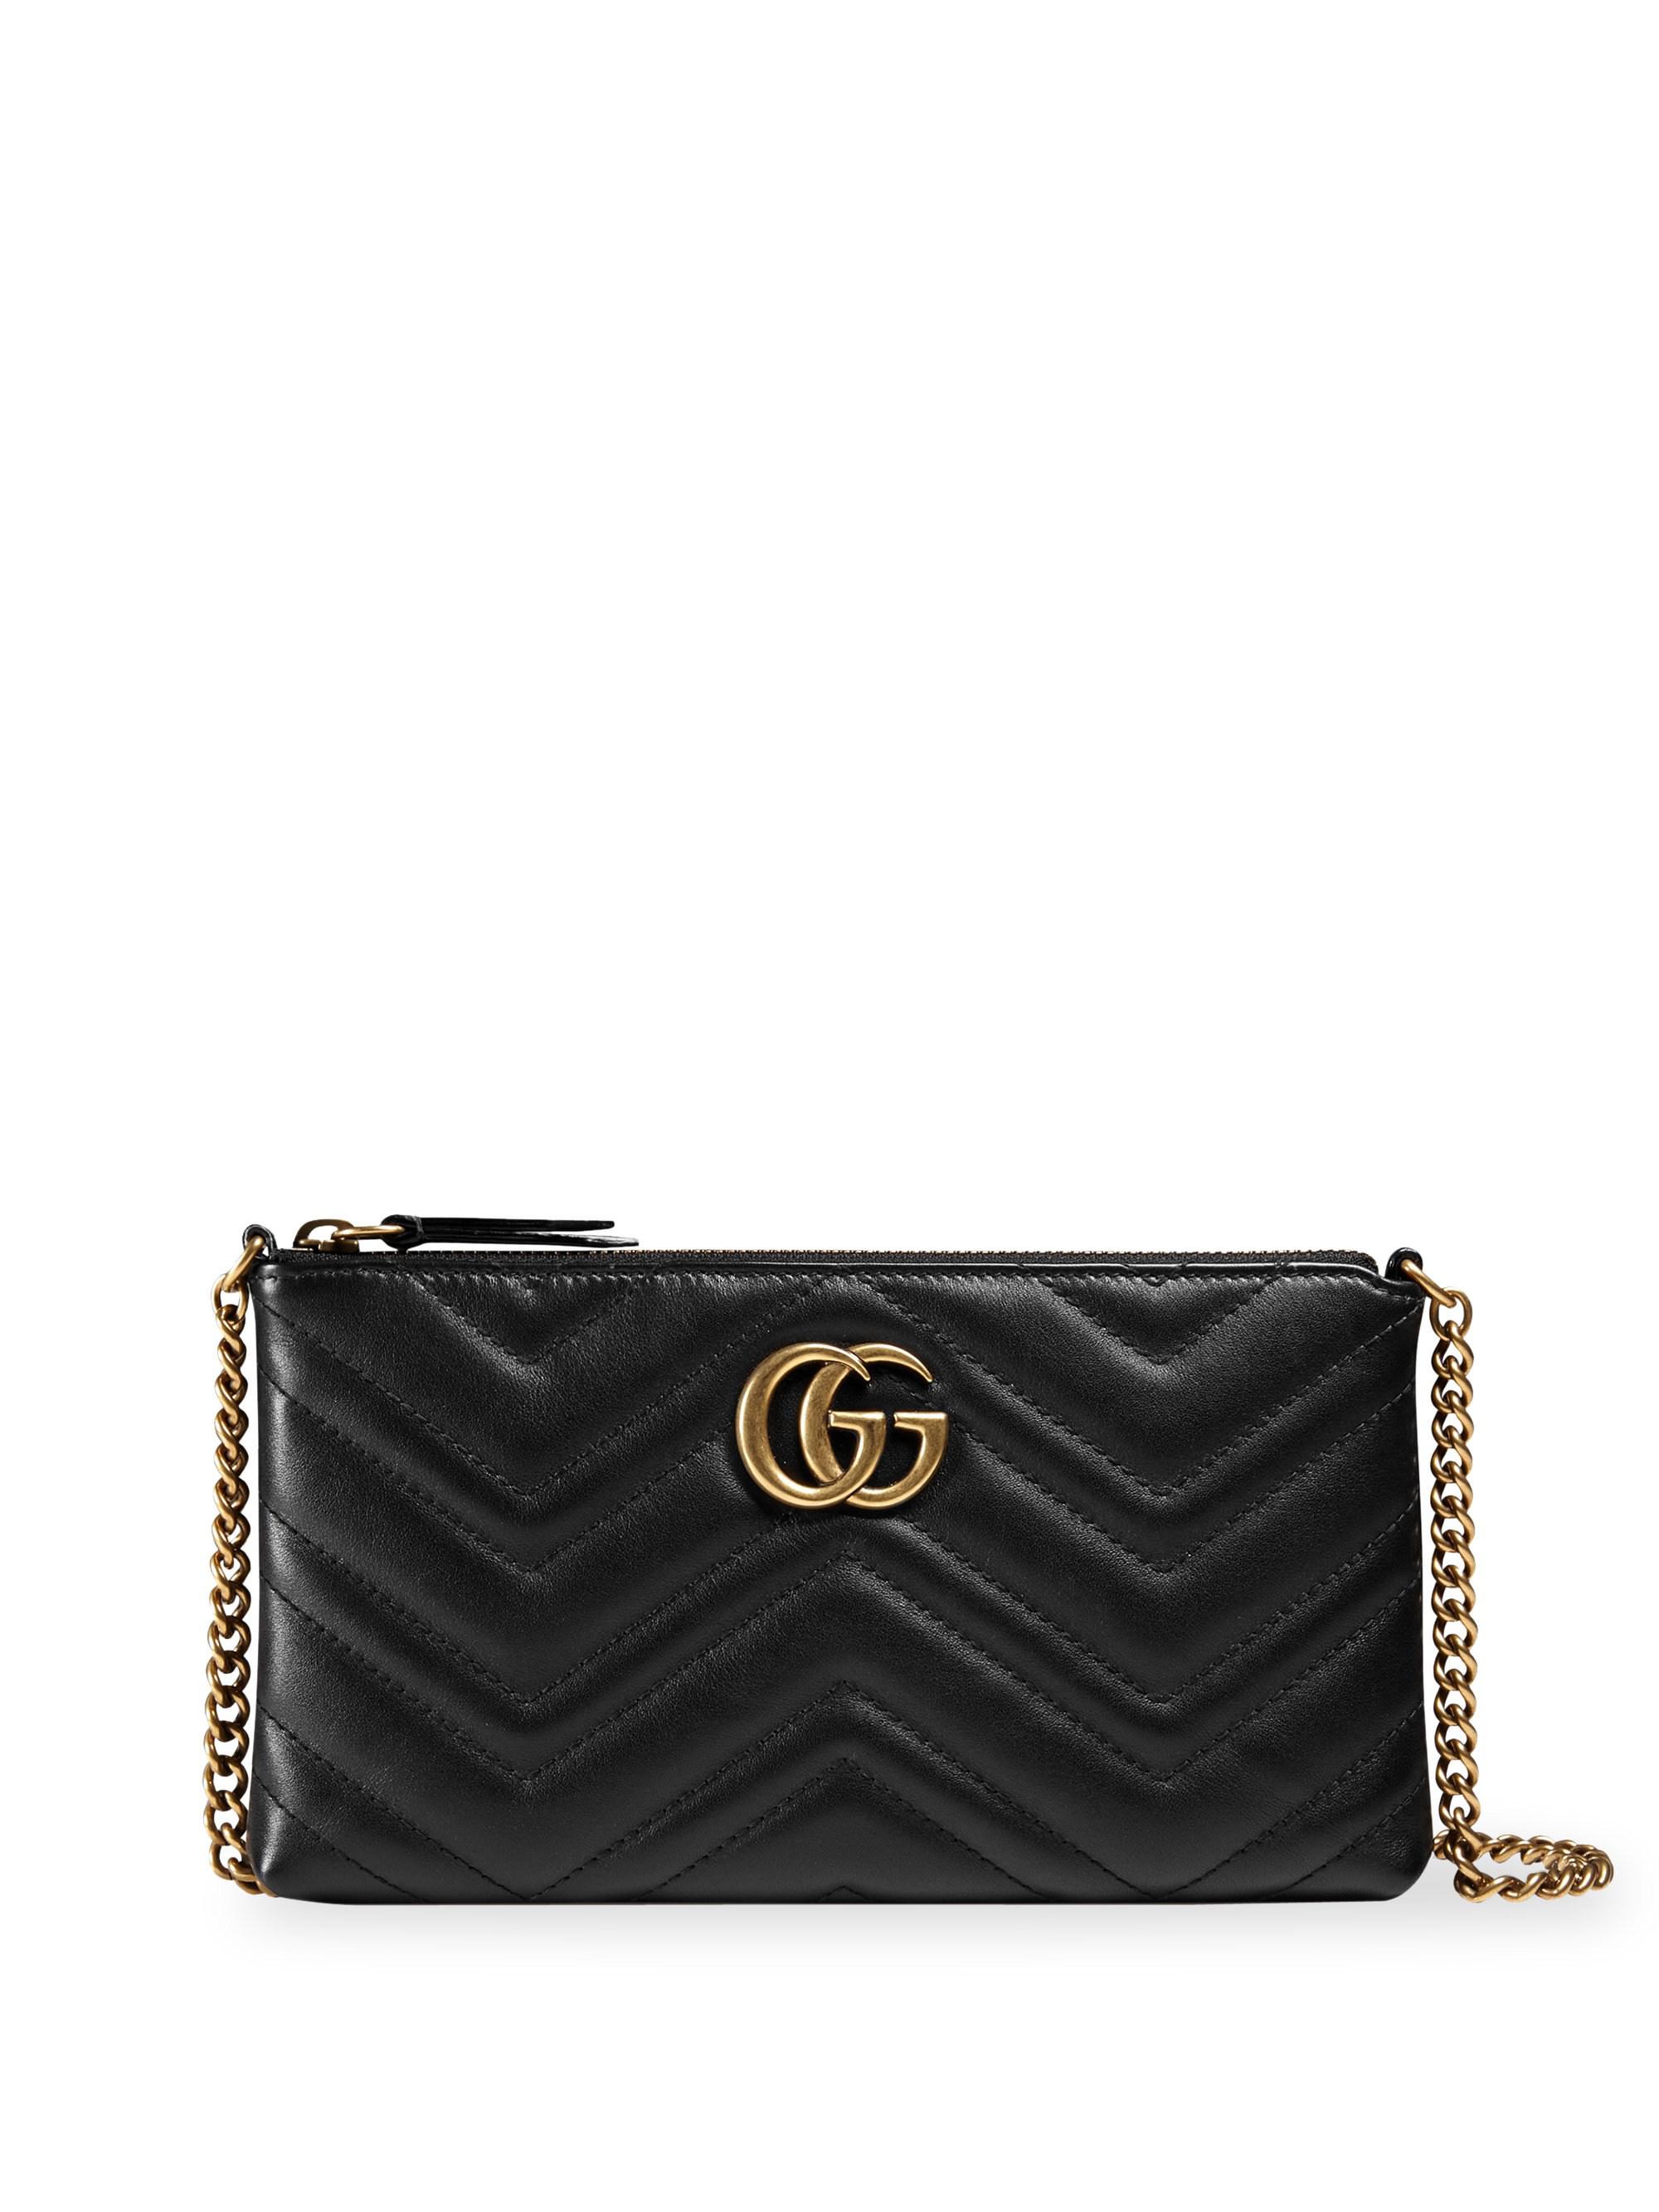 Gucci Quilted Leather Chain Wristlet in Black - Lyst